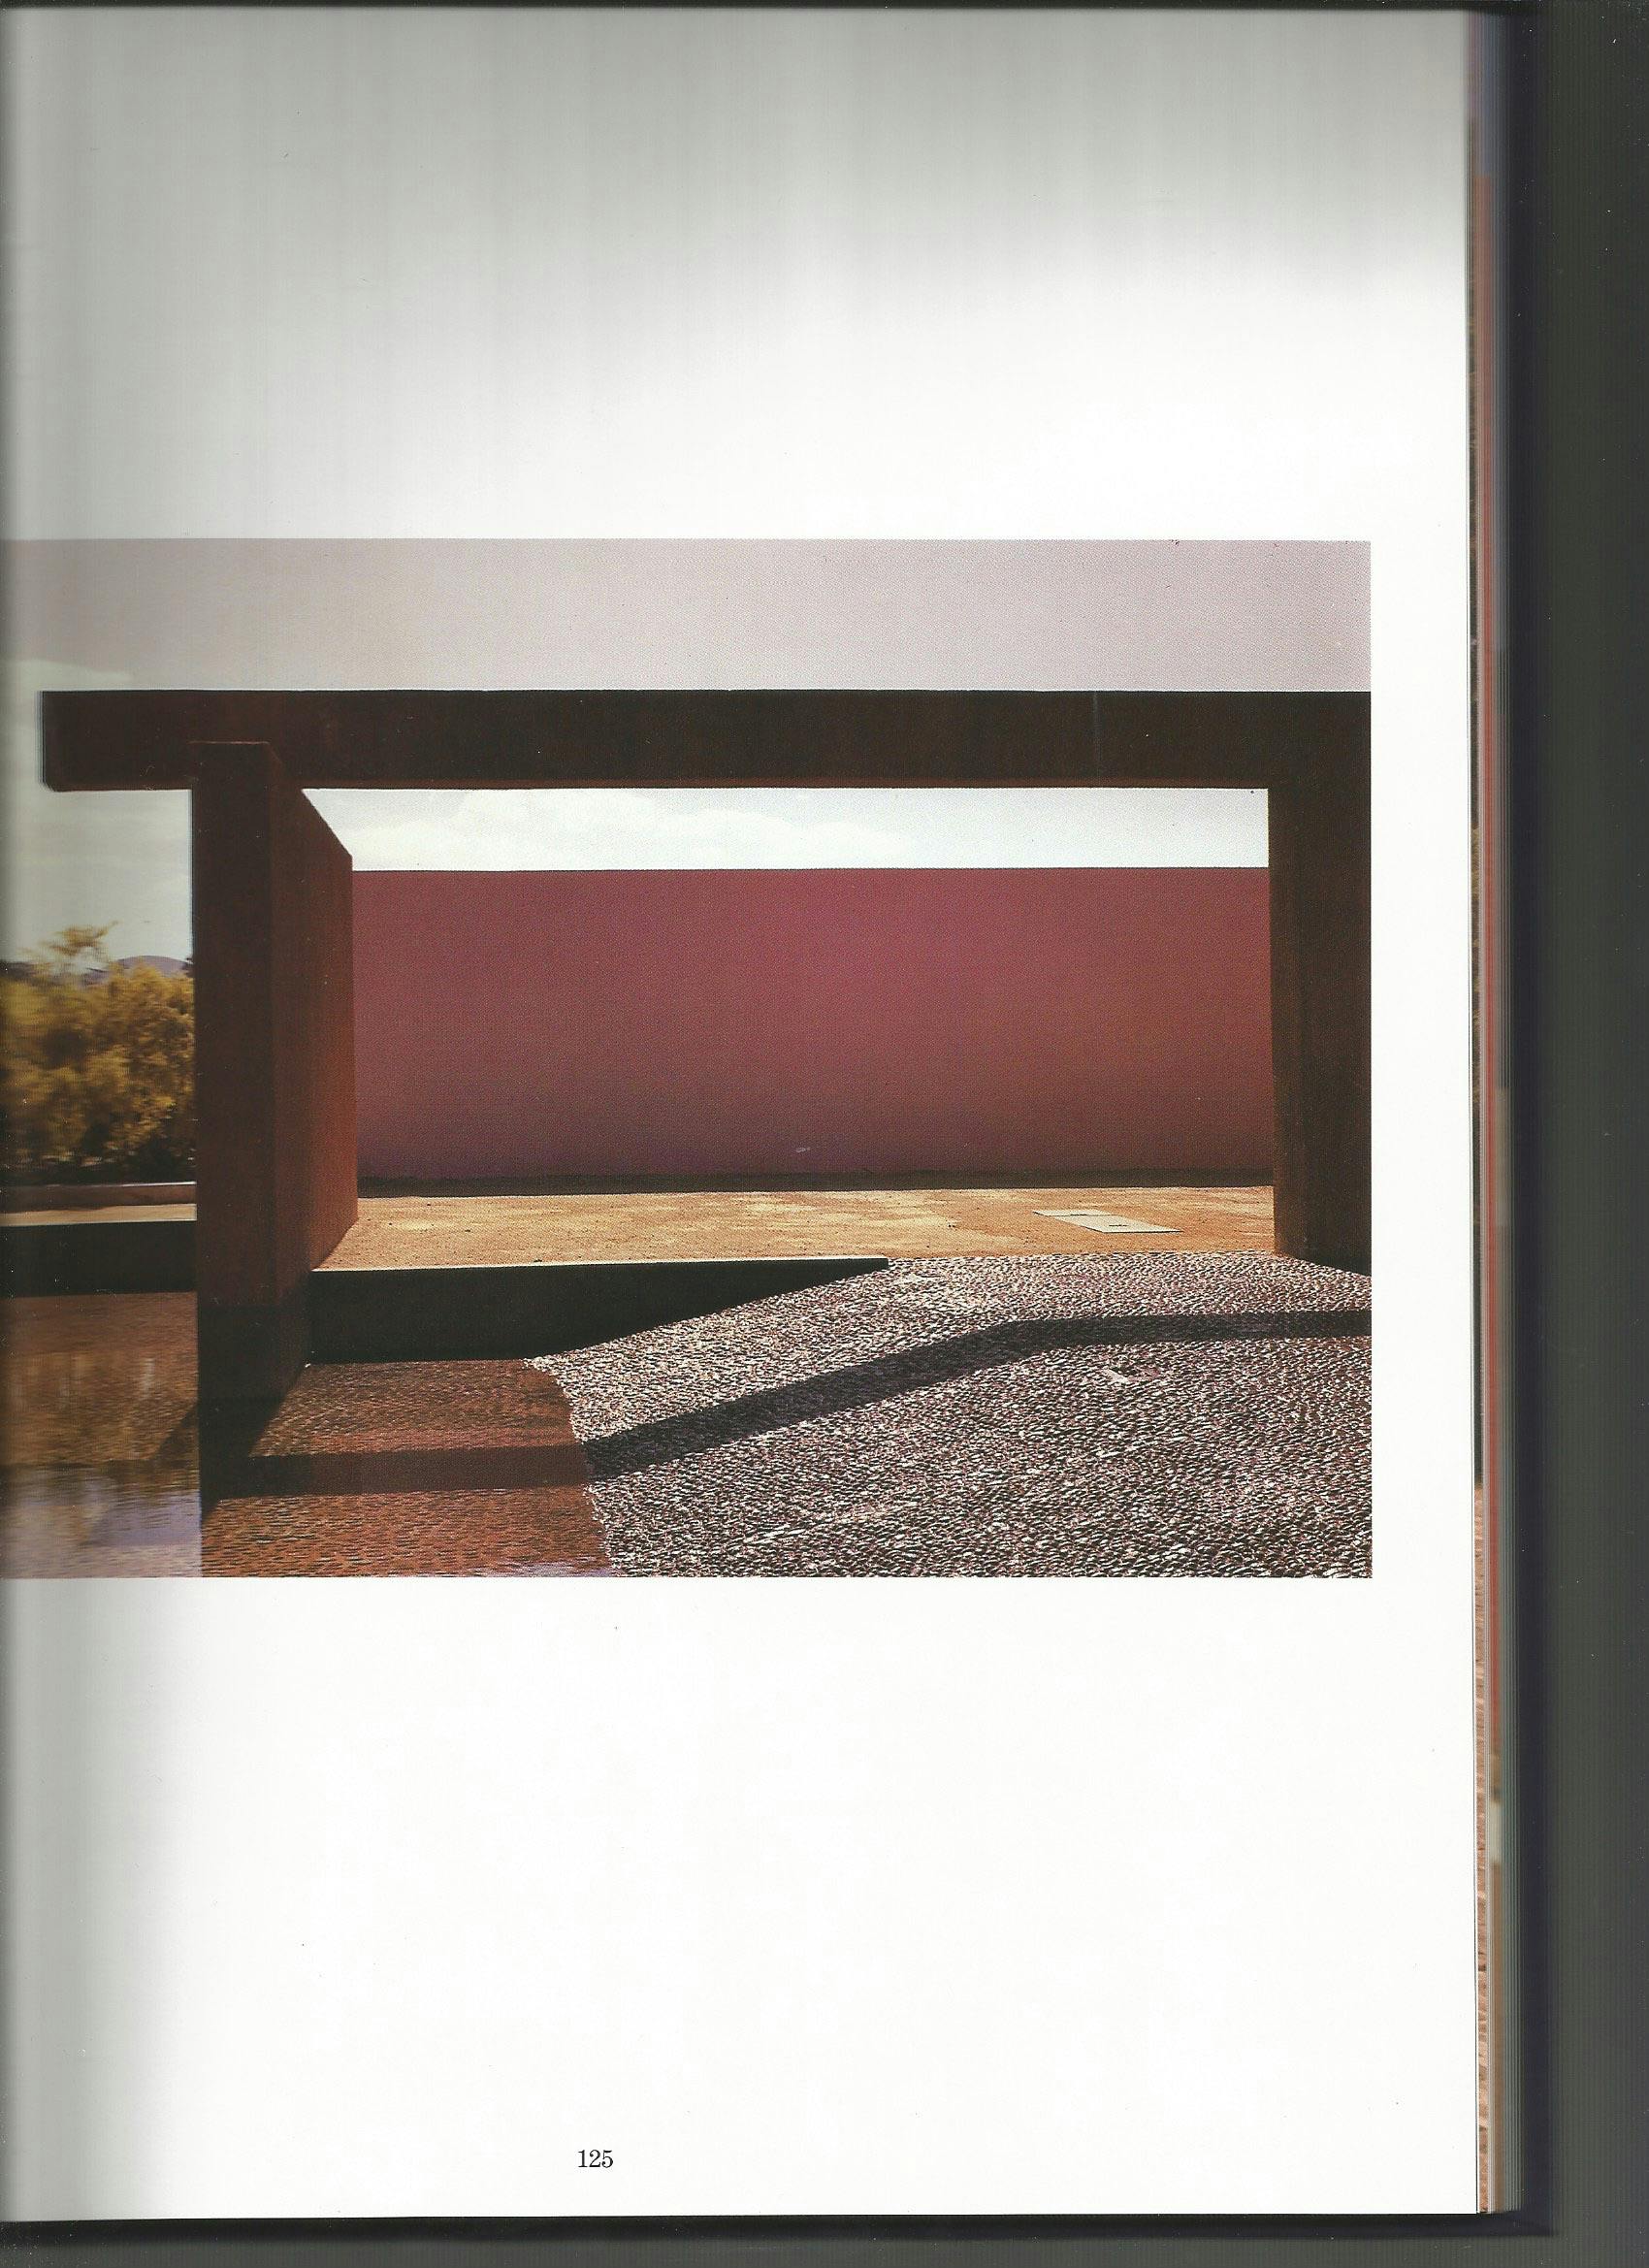 Armando Salas Portugal Photographs Moder Architecture of Mexico Vol. 1 - Luis Barragan - Satellite City Towers Front View